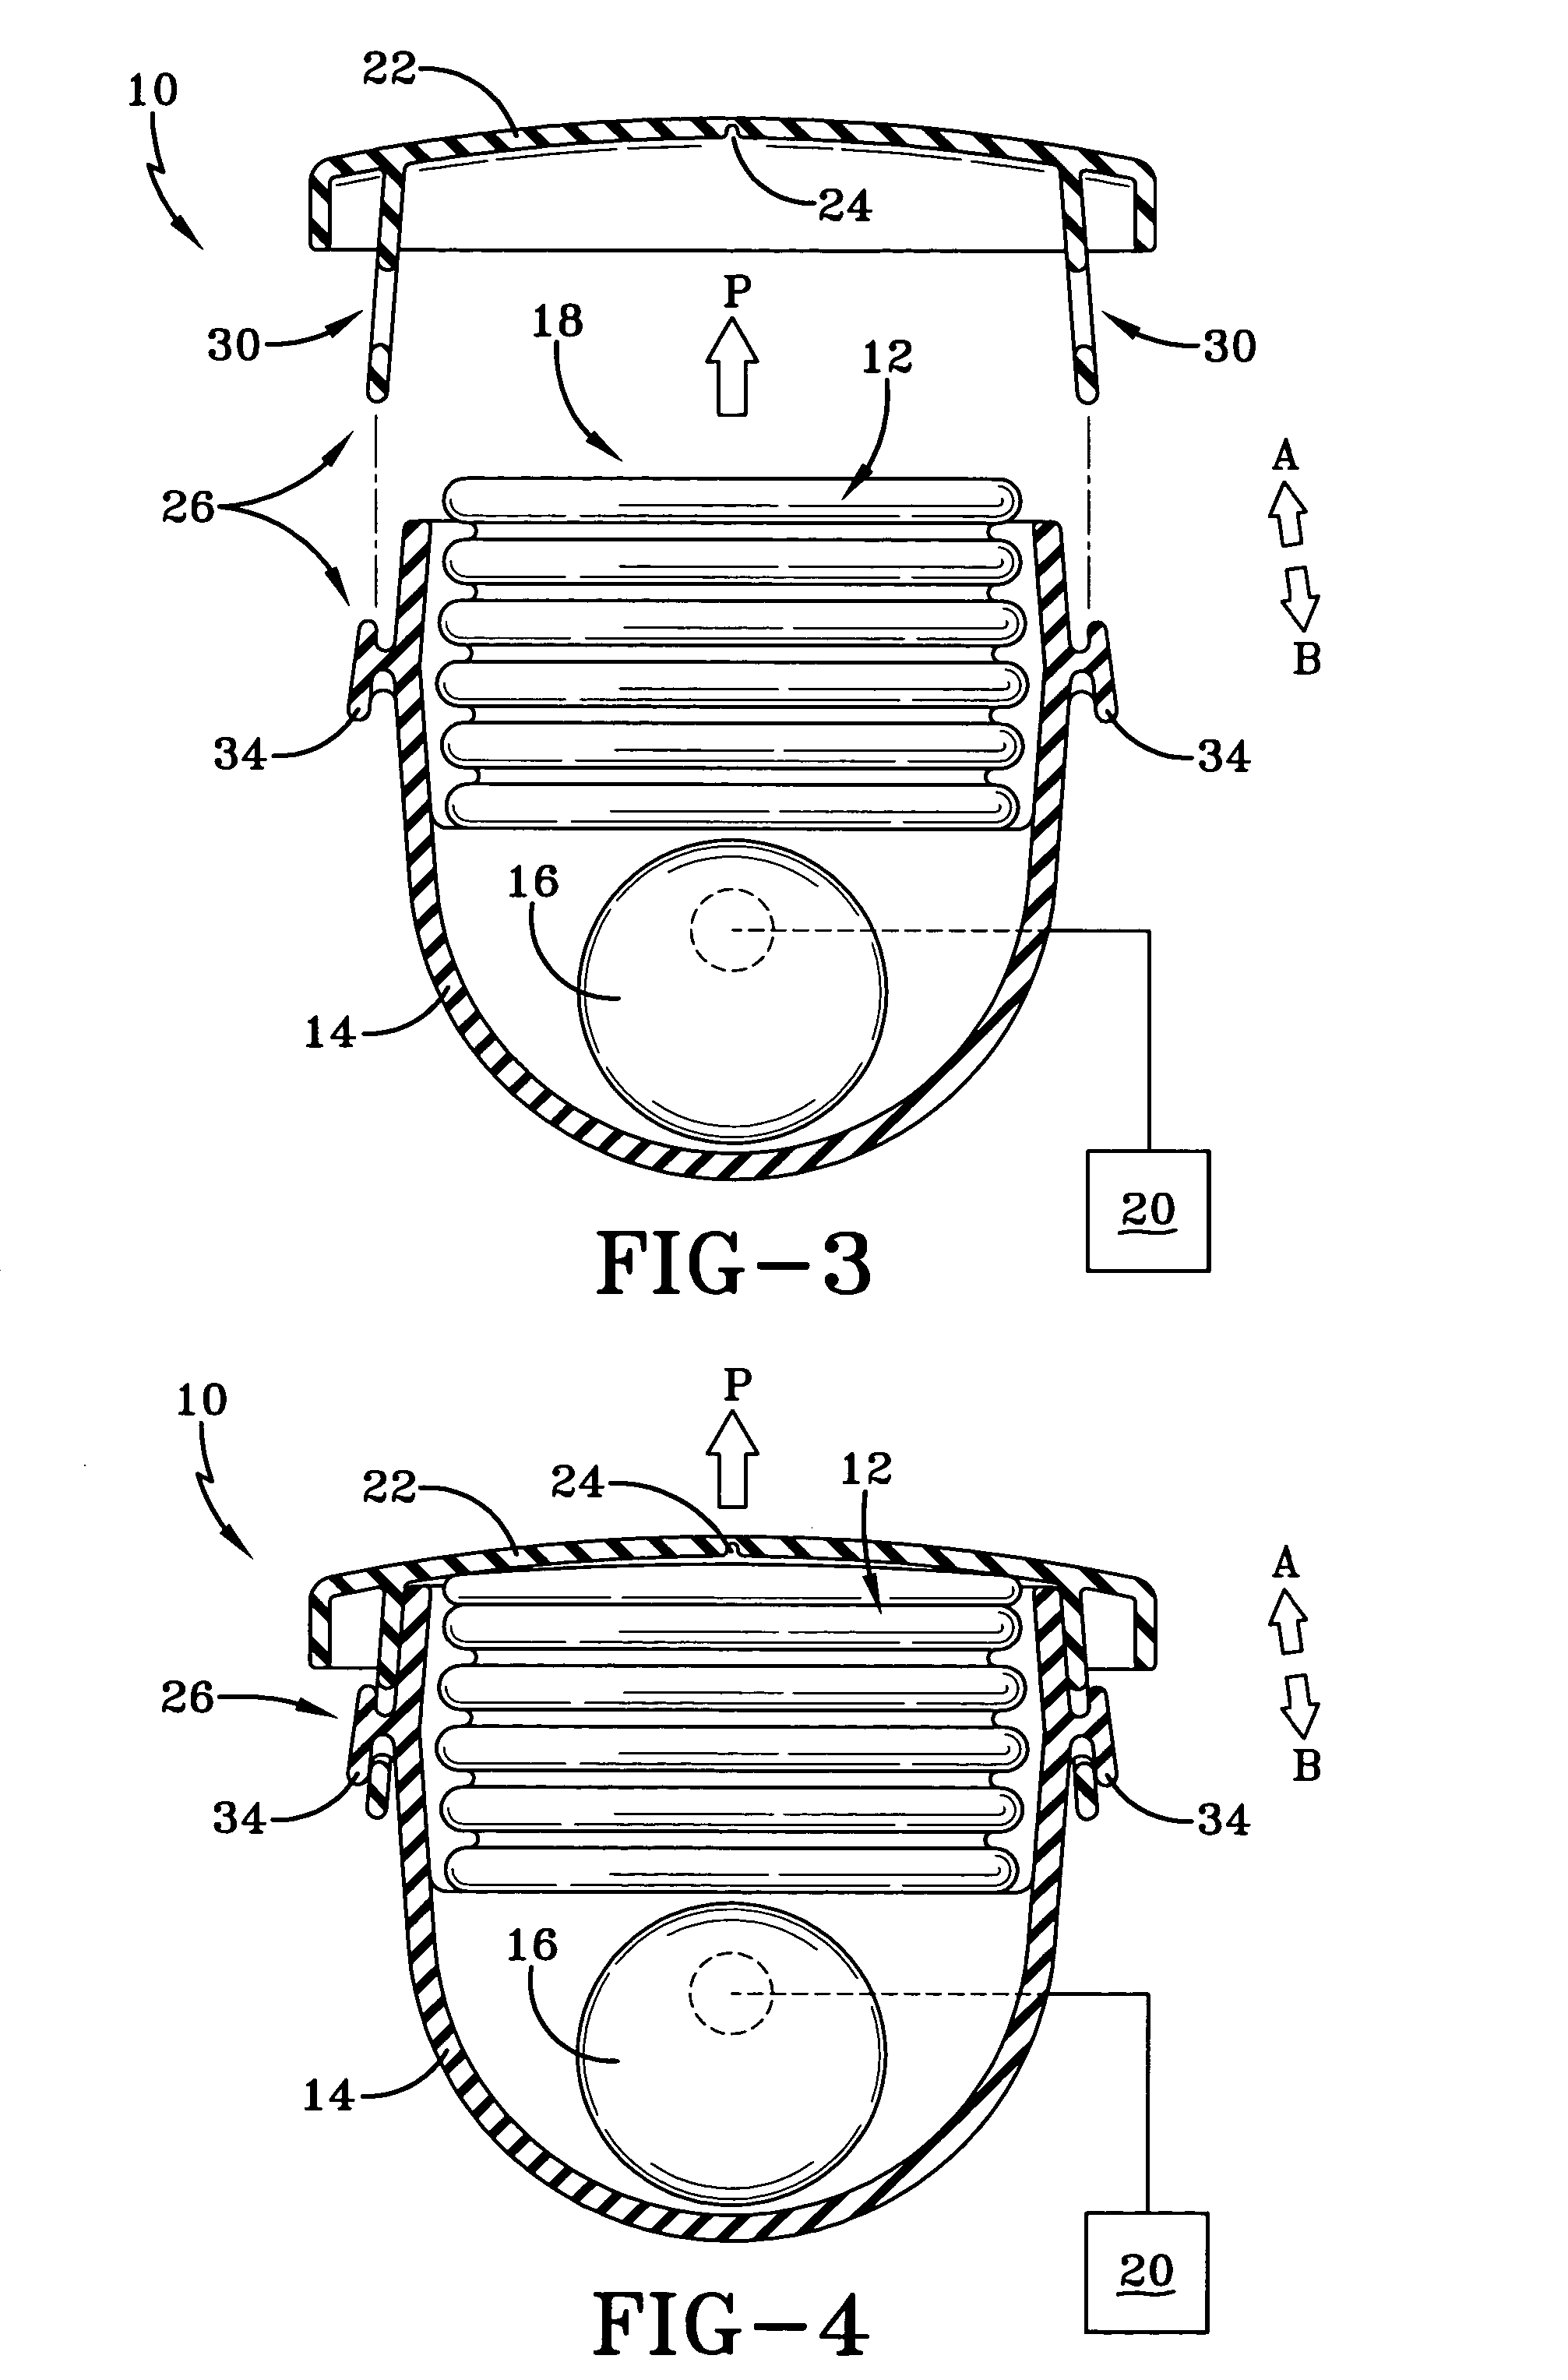 Air bag door and attachment method